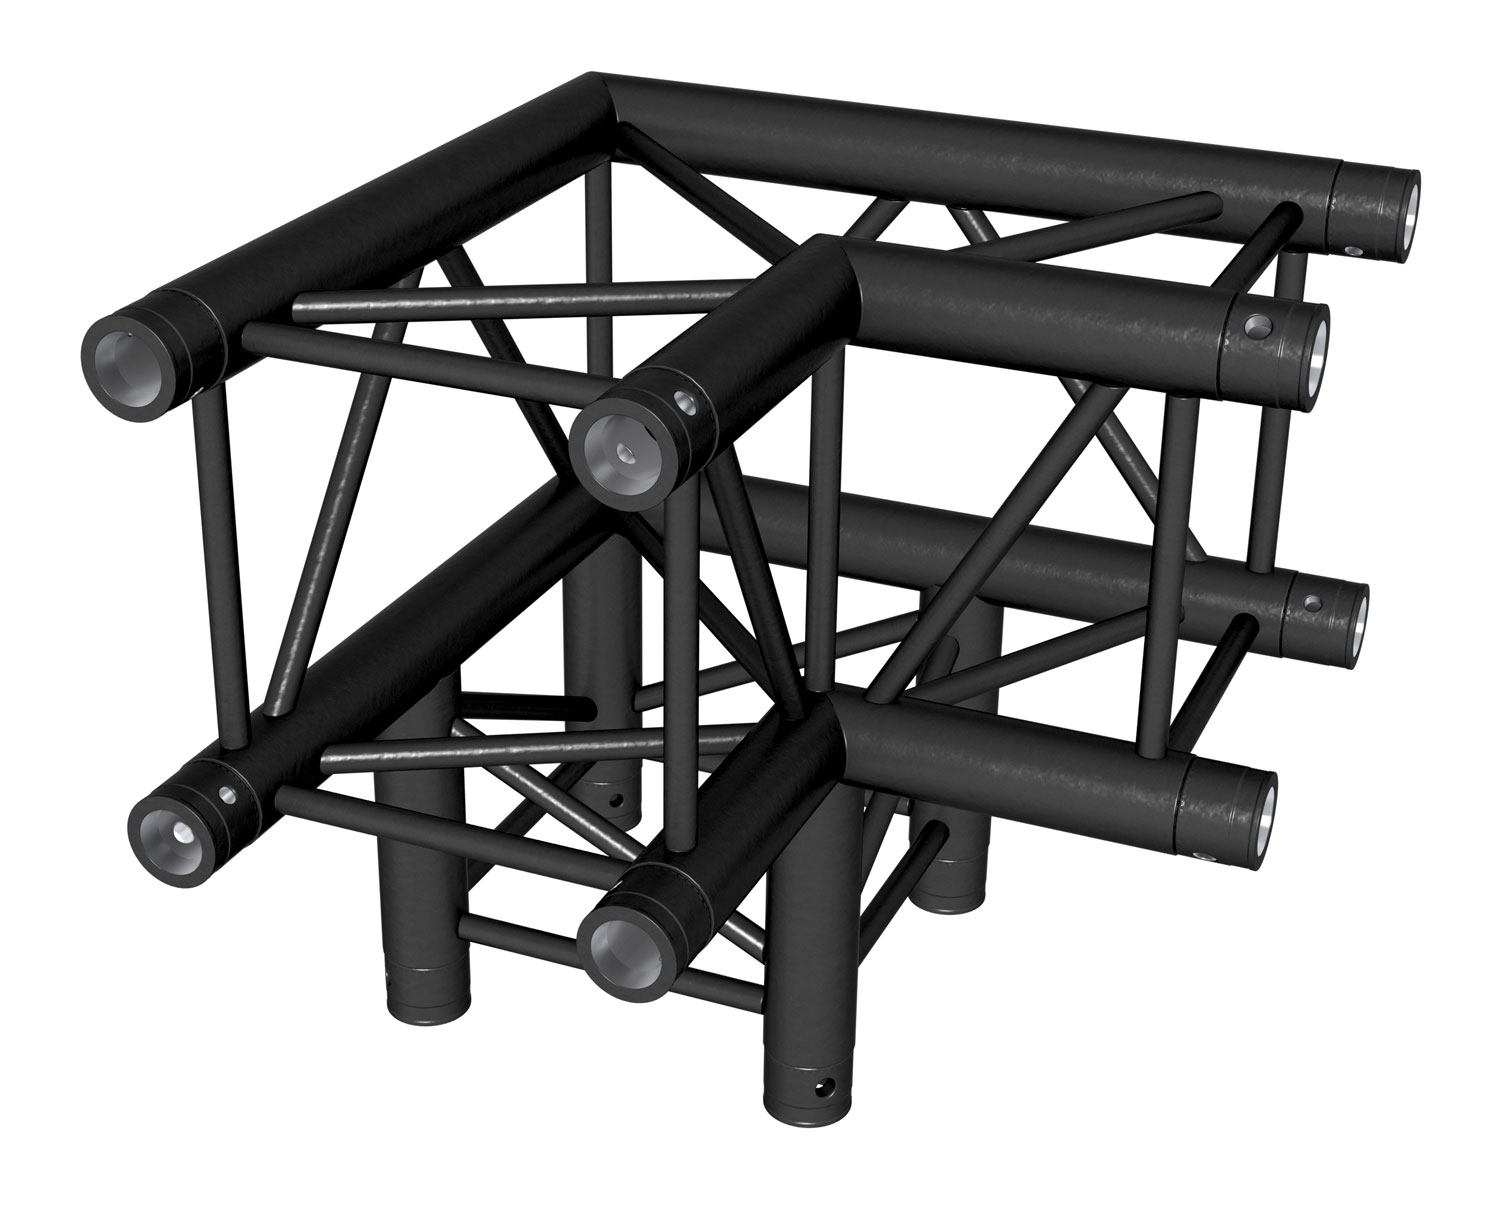 TRUSS Quatro 290 side piece - 90- - 3 directions - black - Connection kits included